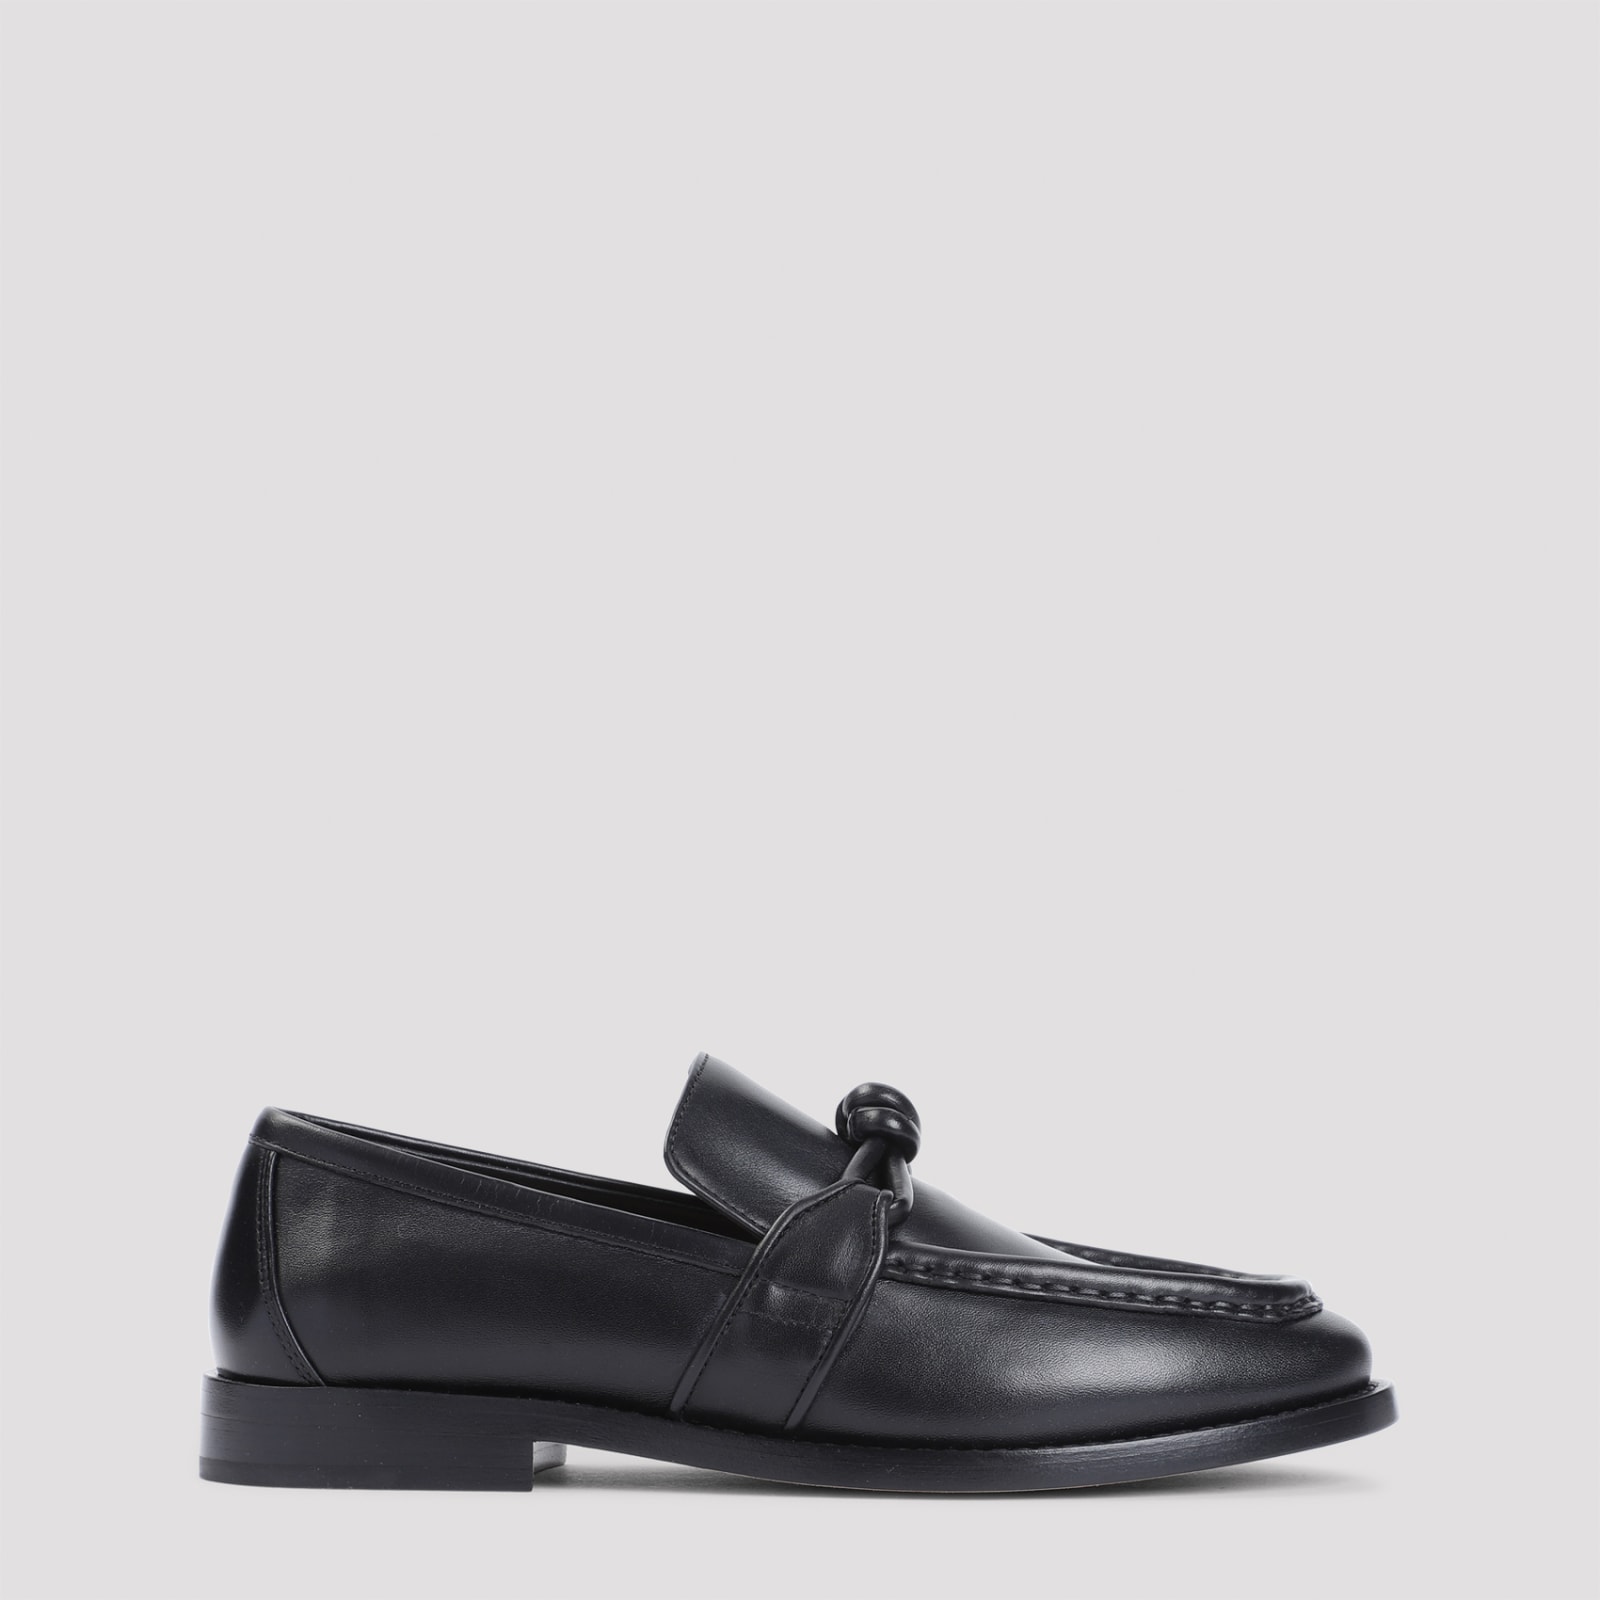 Astaire Loafer